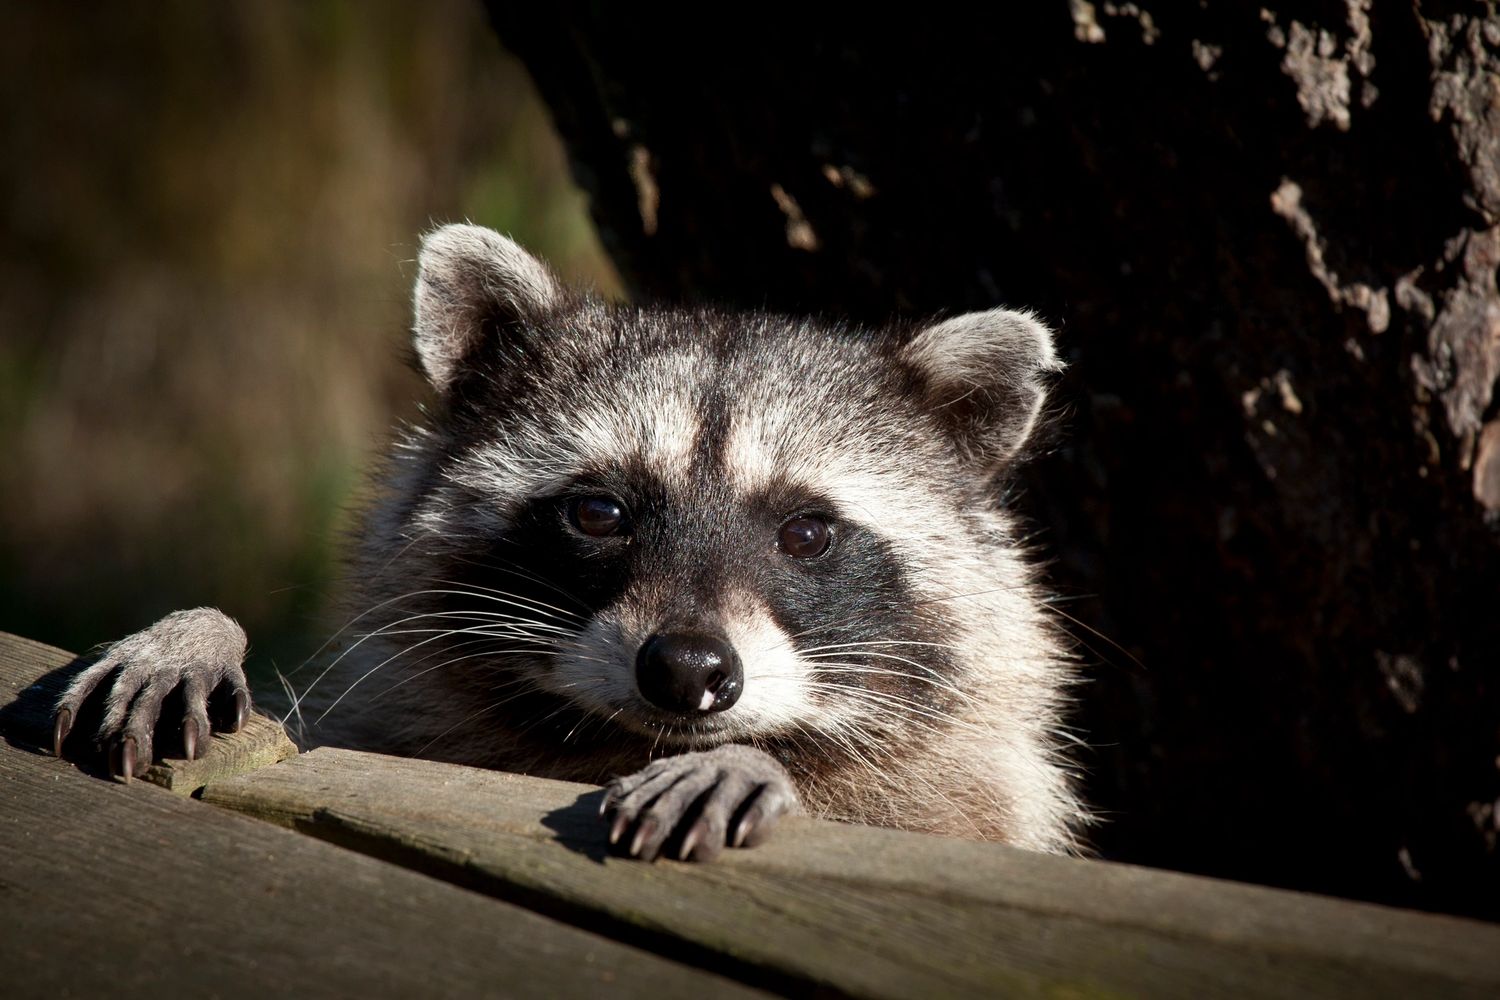 Raccoon standing near tree with paws on wooden deck and looking at camera